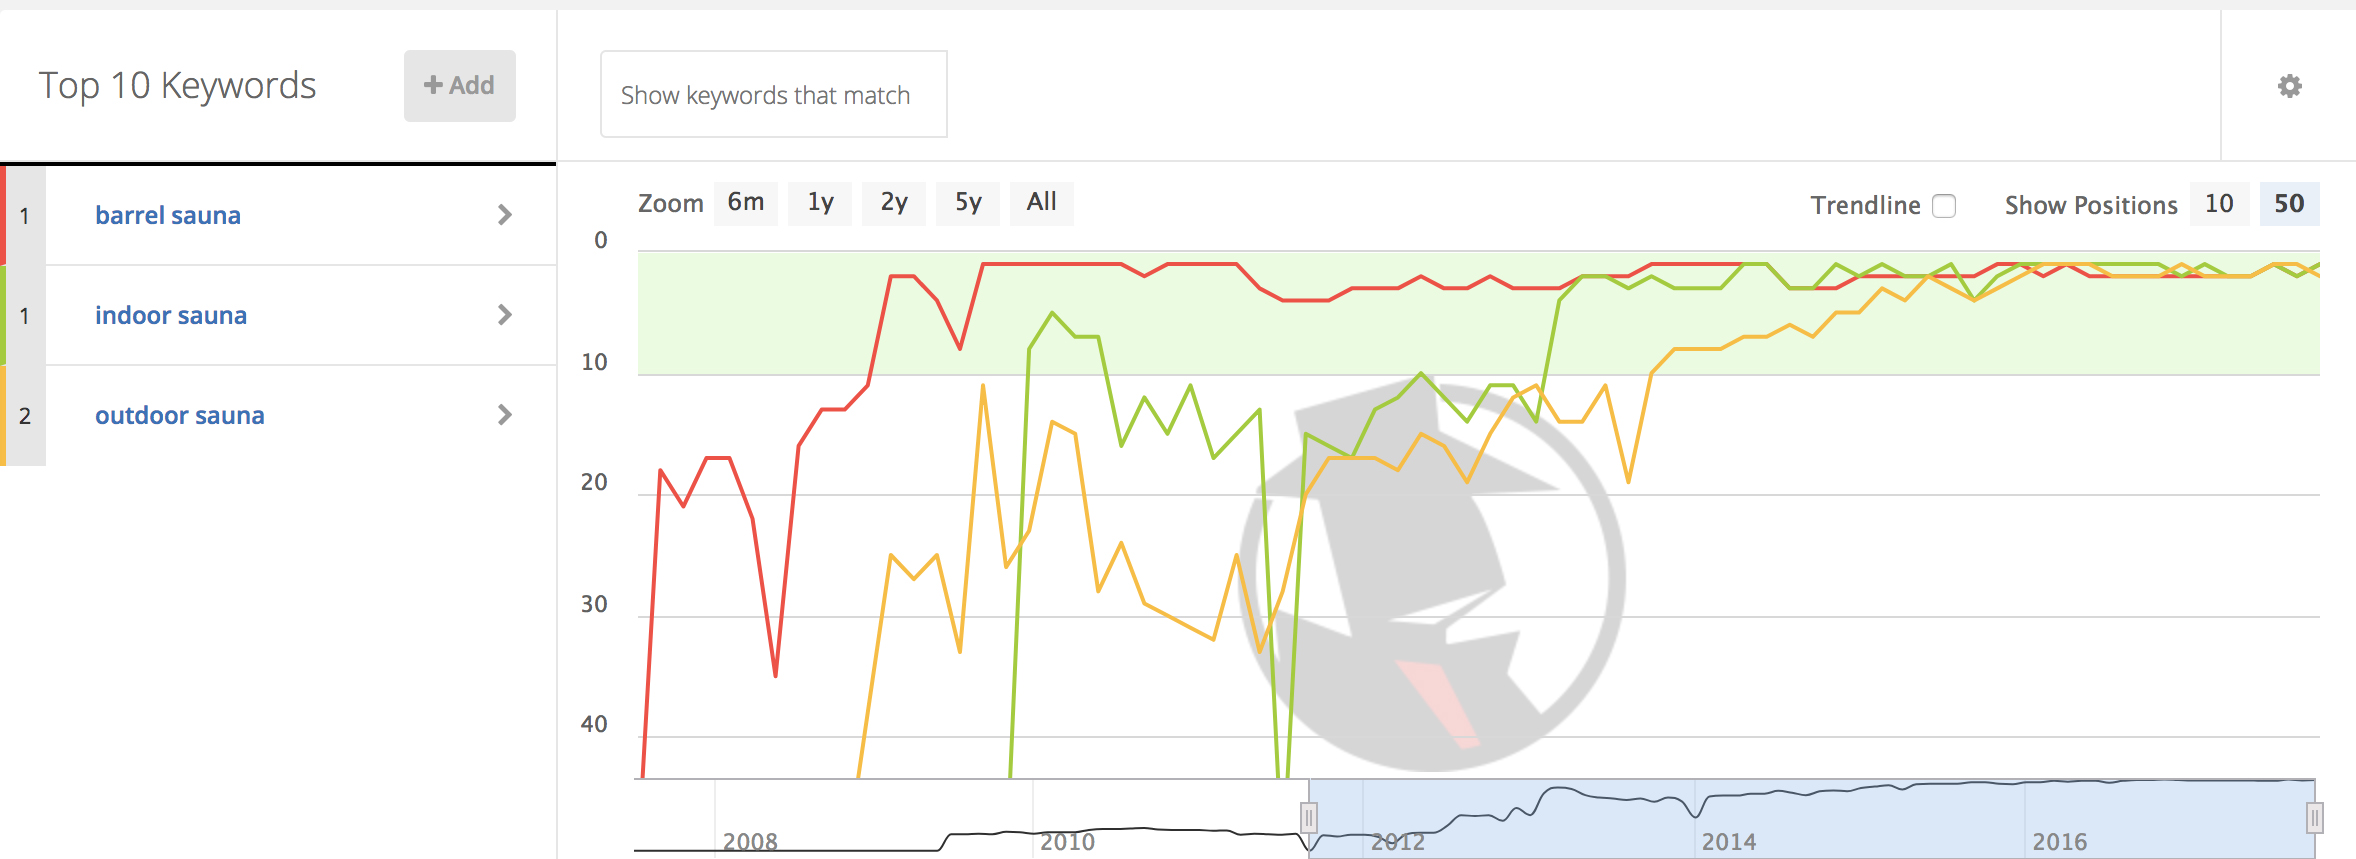 SEO improvements over time